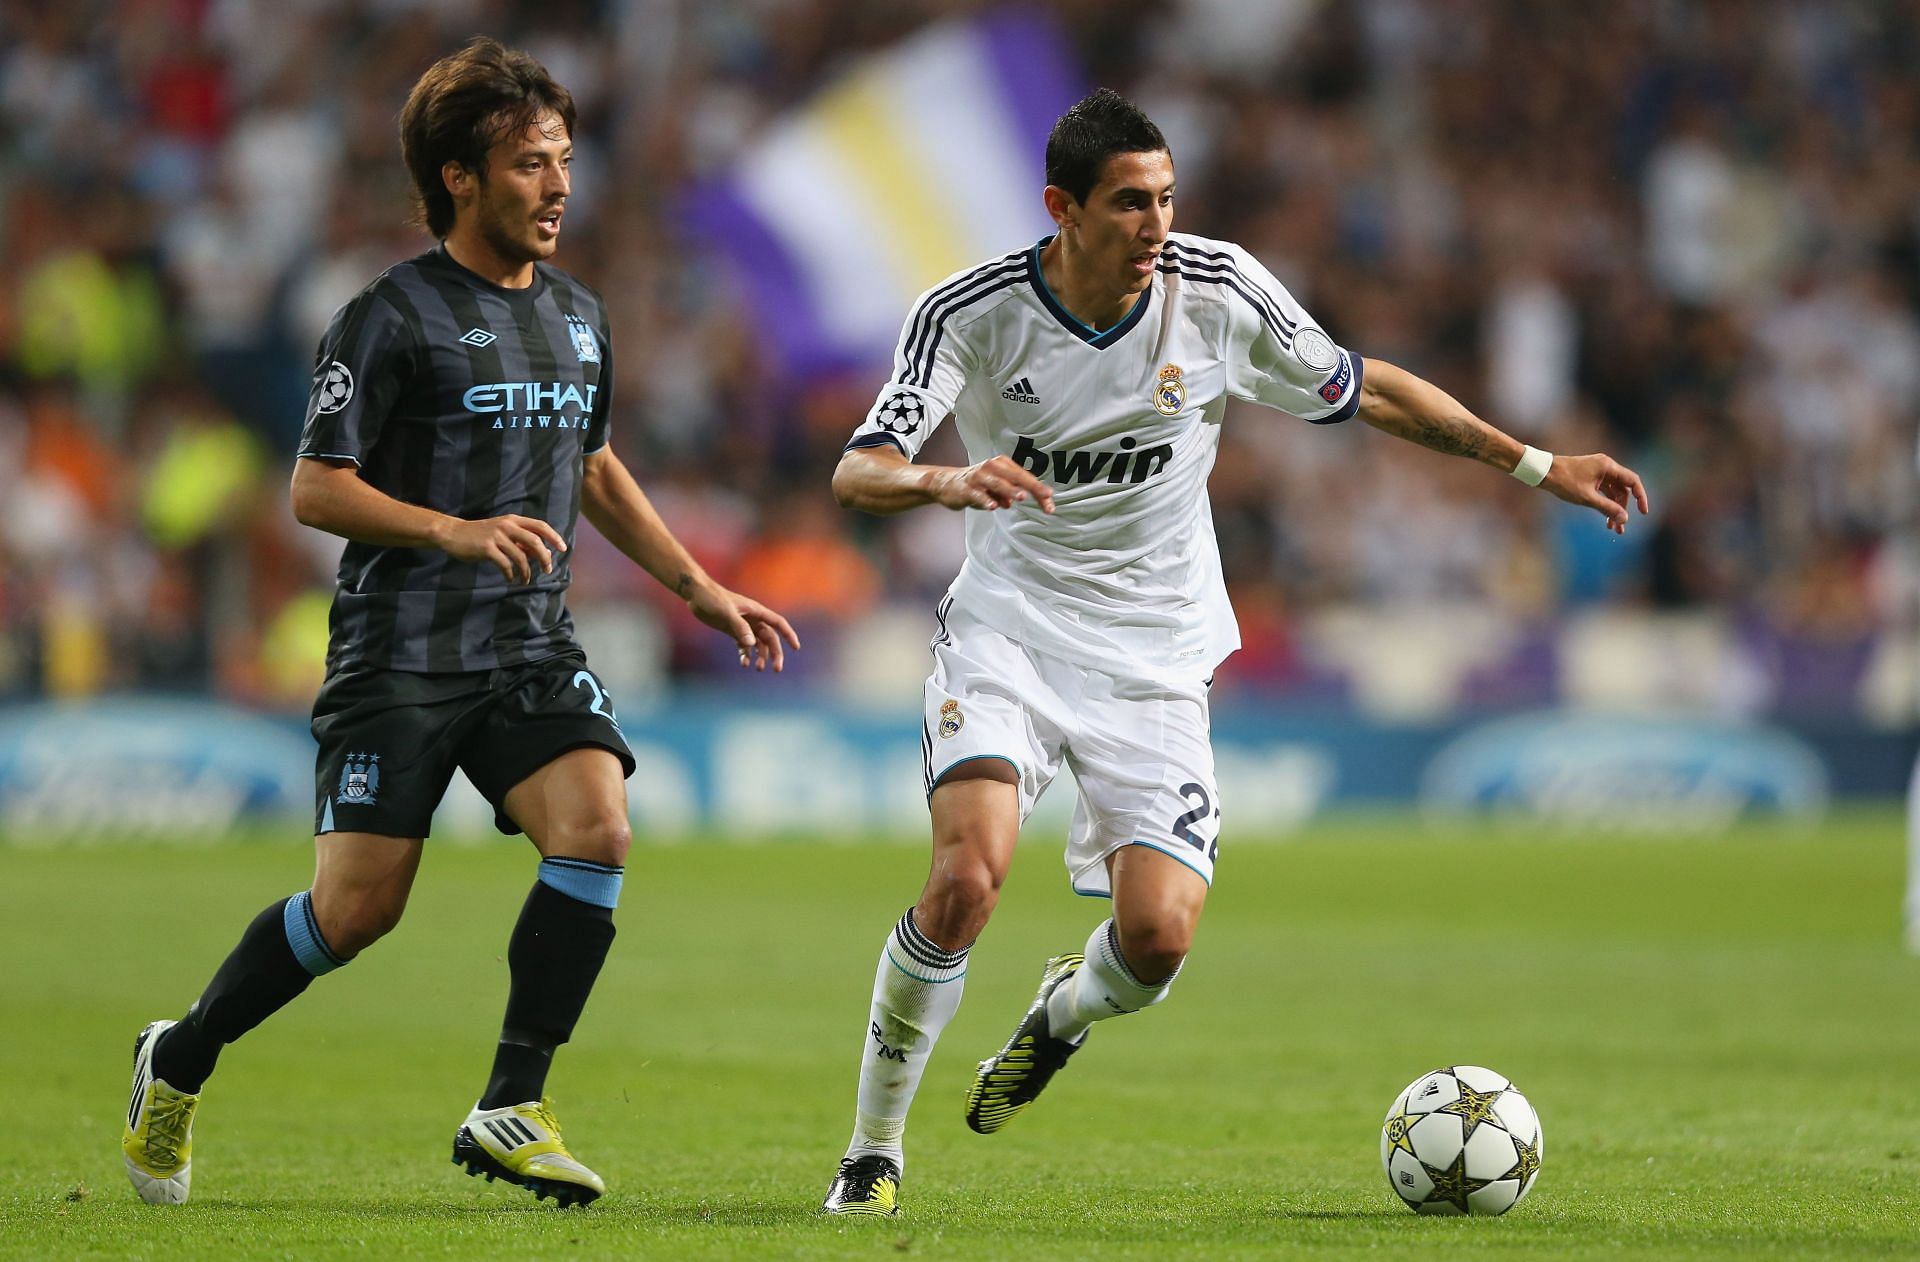 Angel Di Maria was an incredible winger for Real Madrid.